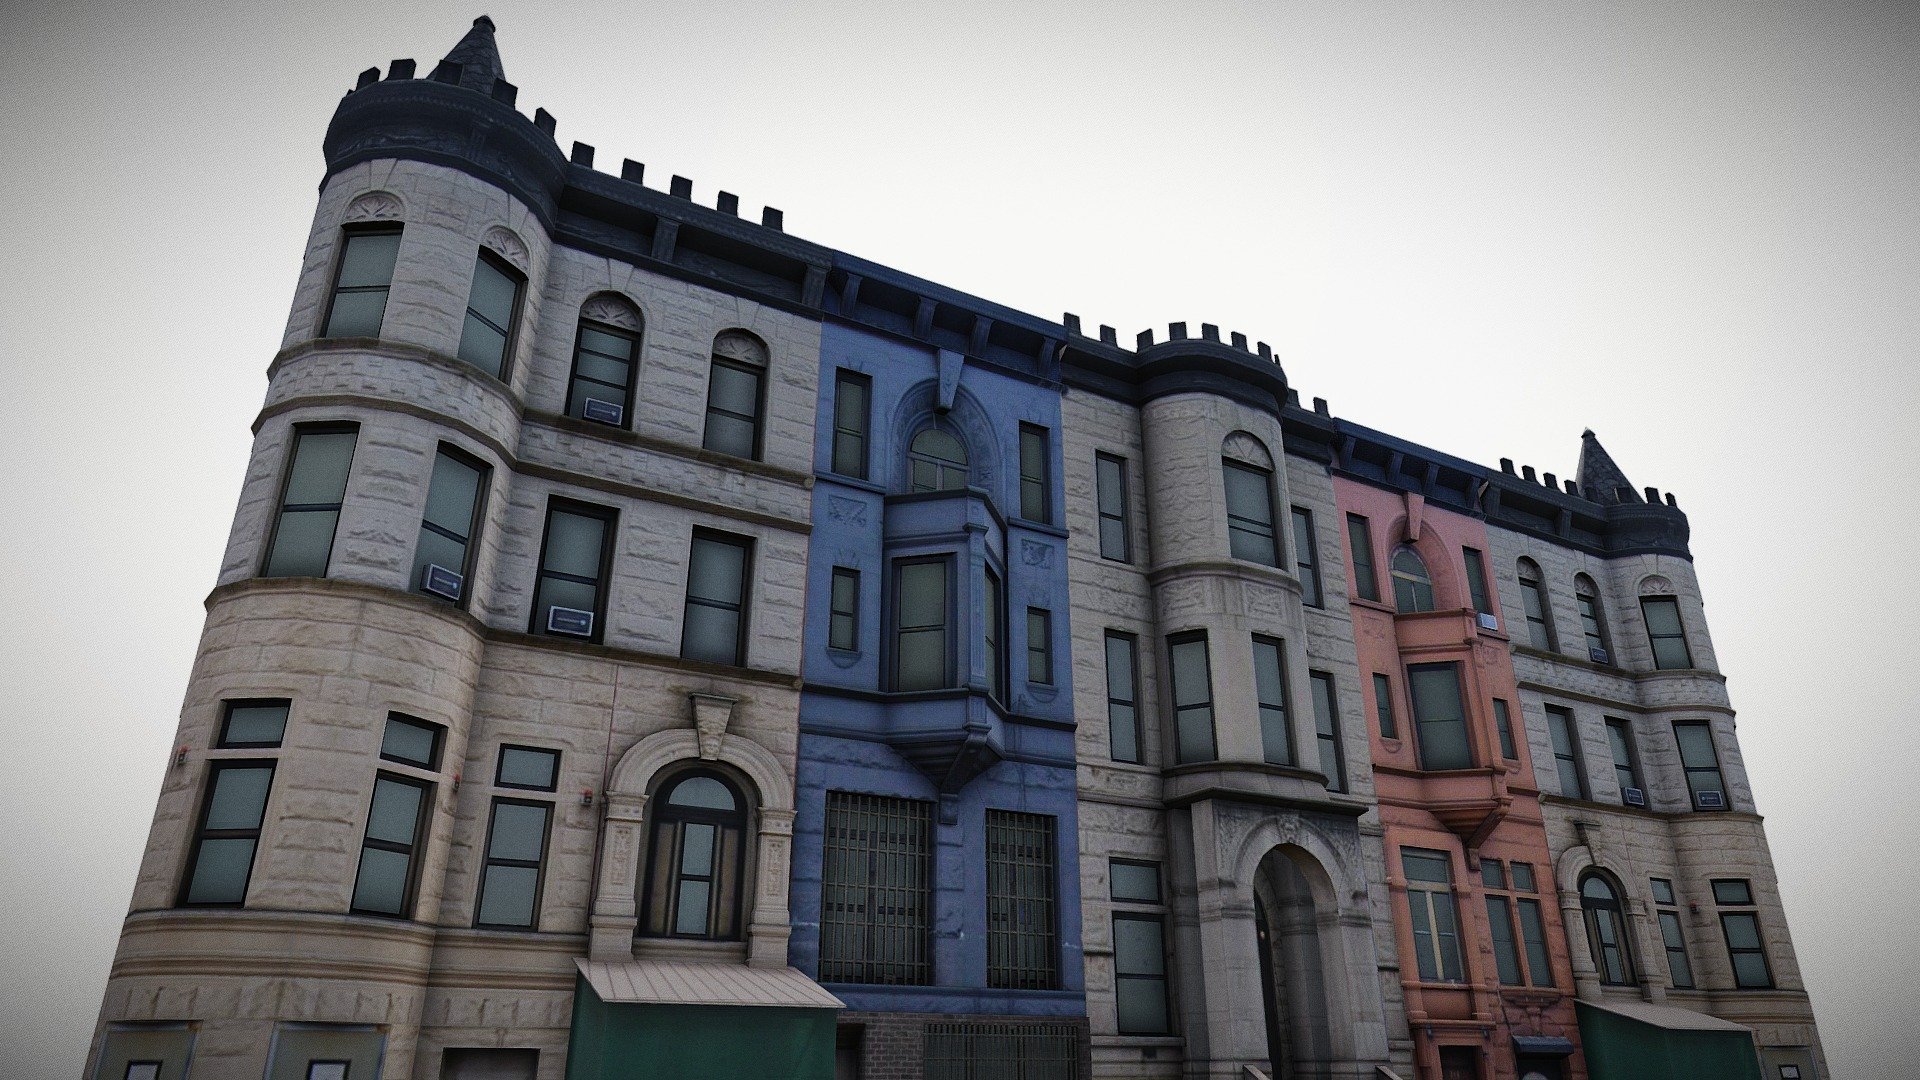 734 St Nicholas Ave,
New York

5 beautiful low poly homes.
Consists of diffuse, roughness and ambient occlusion maps

Formats:

.obj
.fbx
.blend

Enjoy and have a nice day! - Low Poly classical New York City homes - Download Free 3D model by 99.Miles 3d model